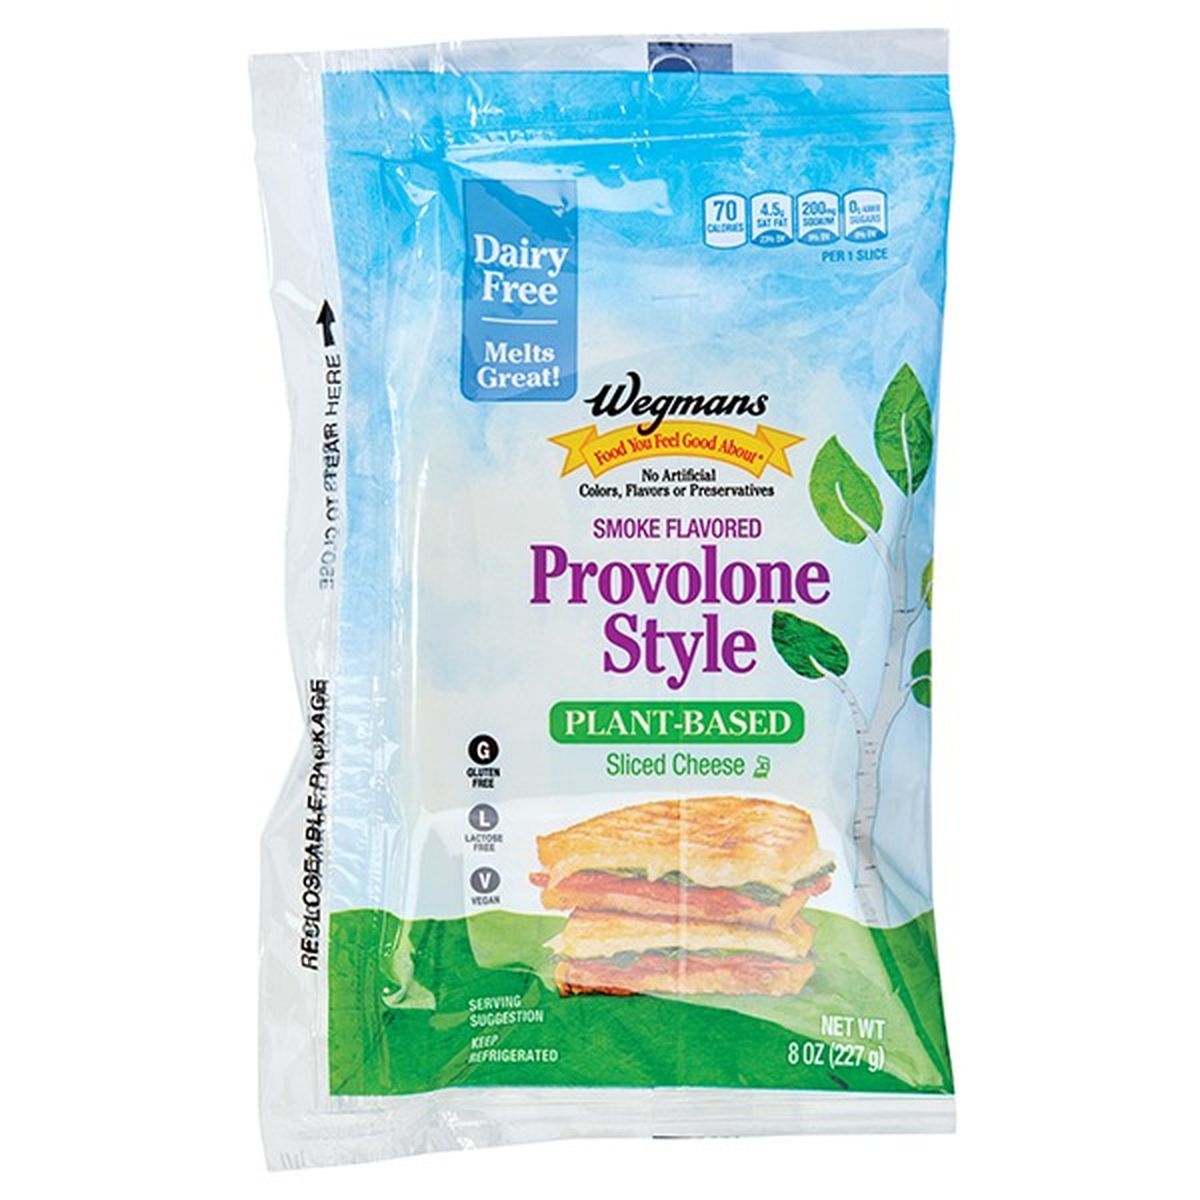 Calories in Wegmans Provolone Style Smoke Flavored Plant Based Sliced Cheese